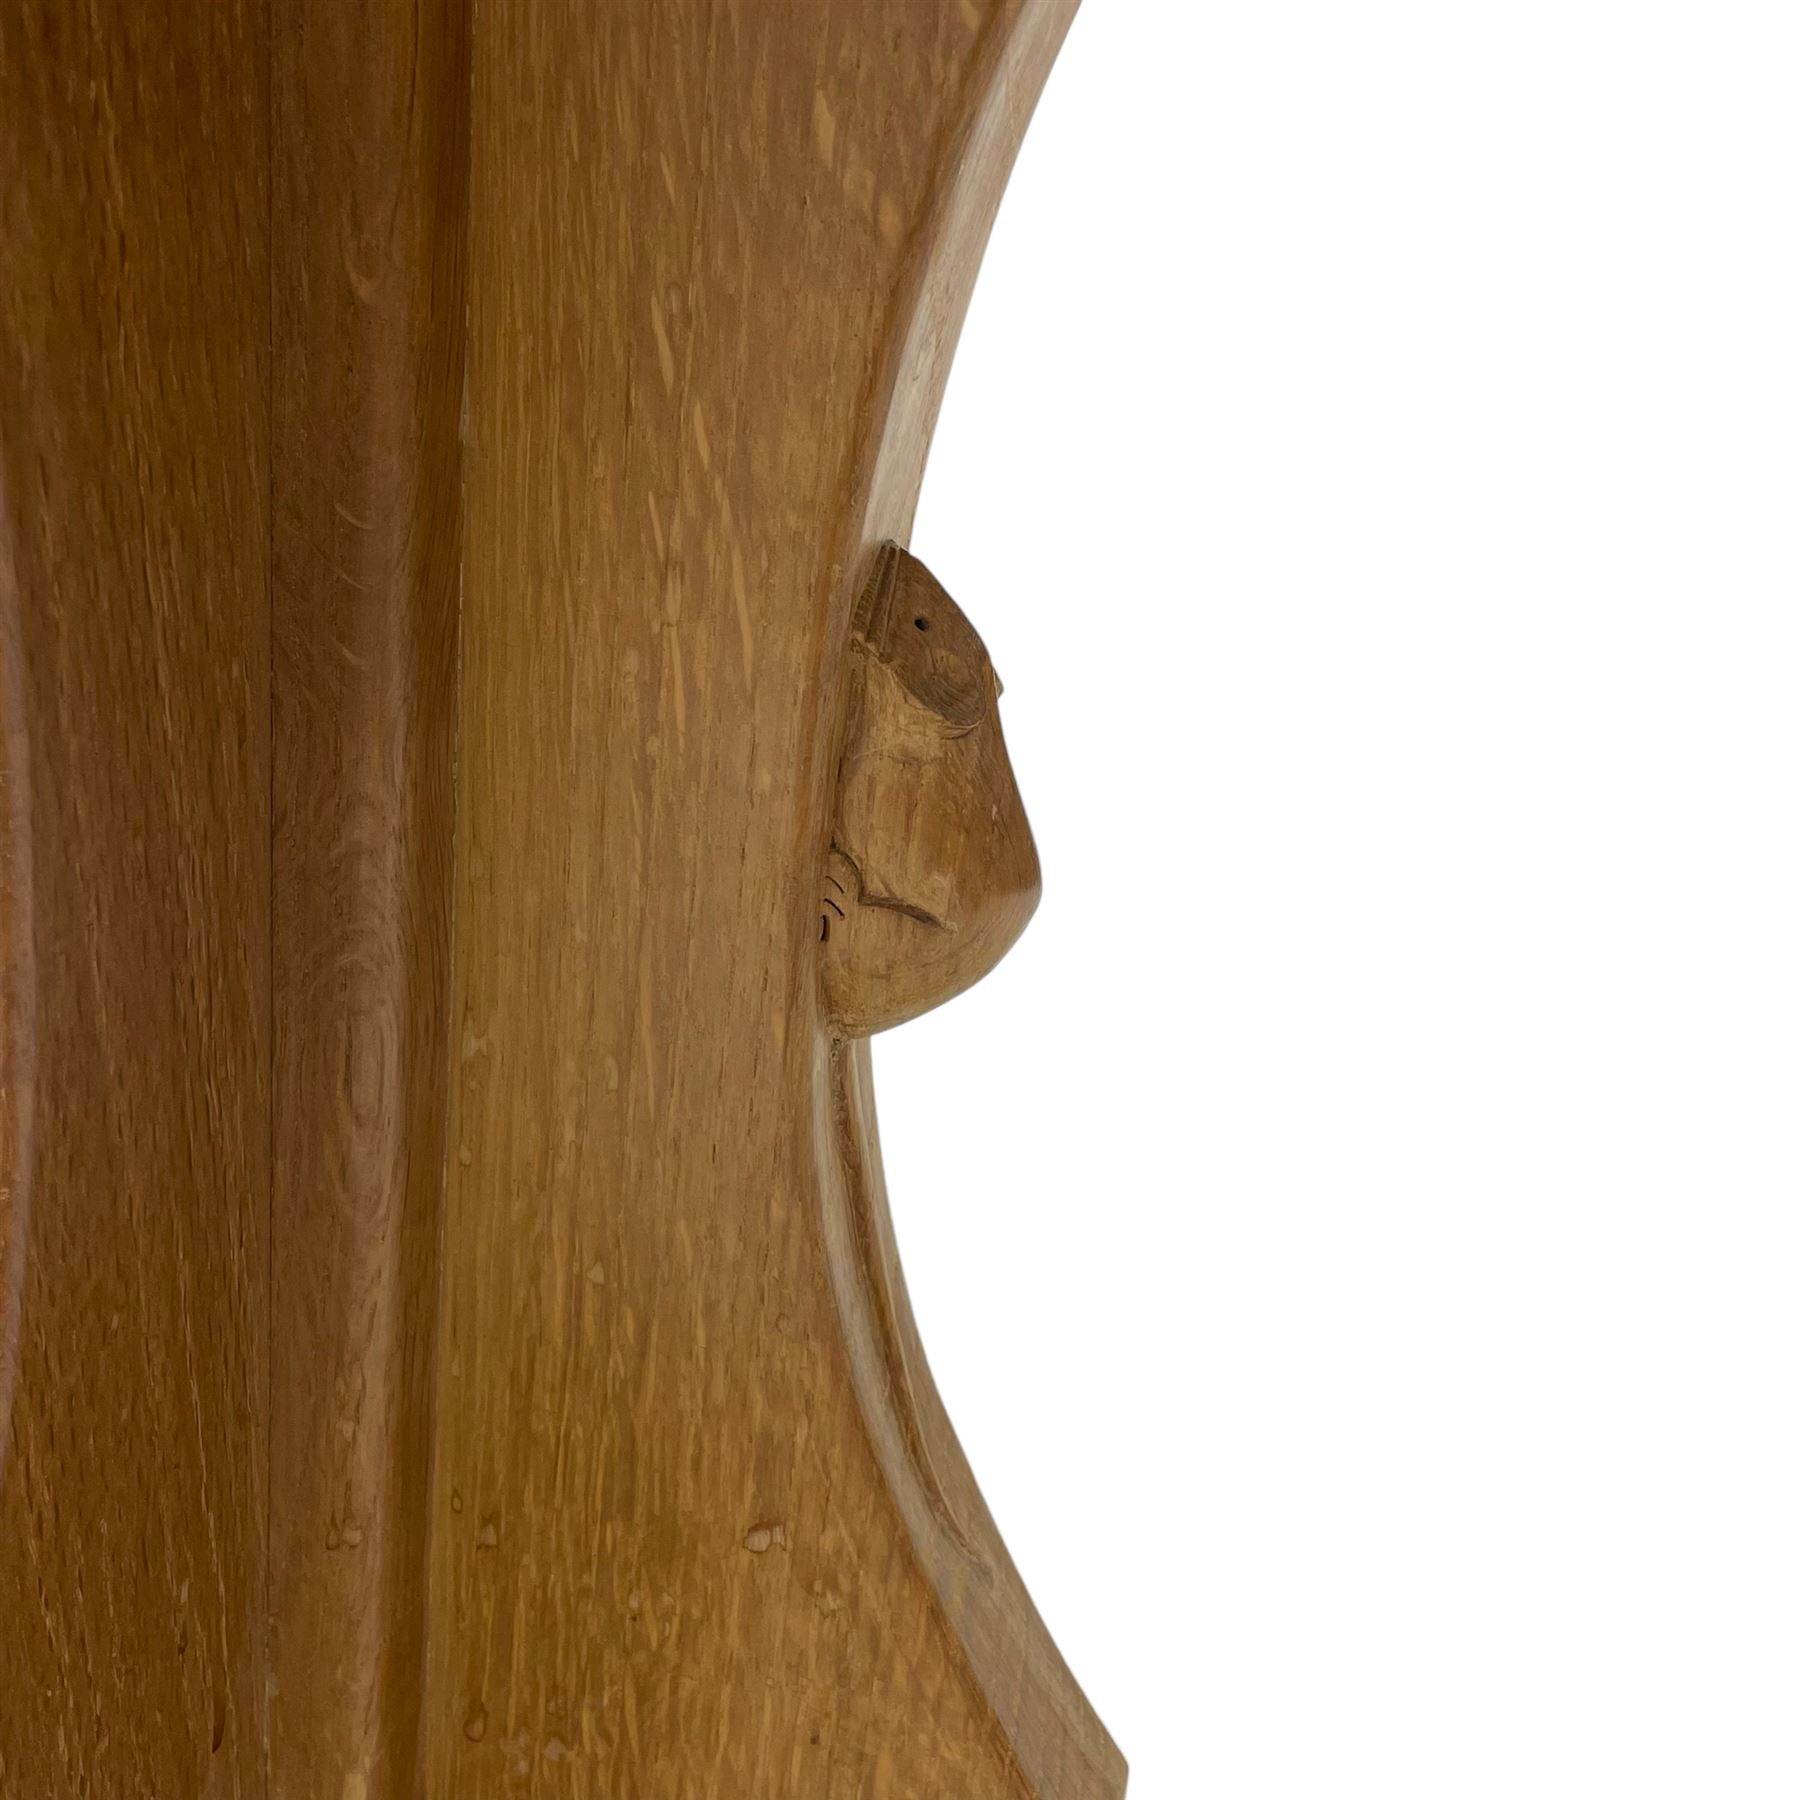 Mouseman - oak occasional table - Image 7 of 7